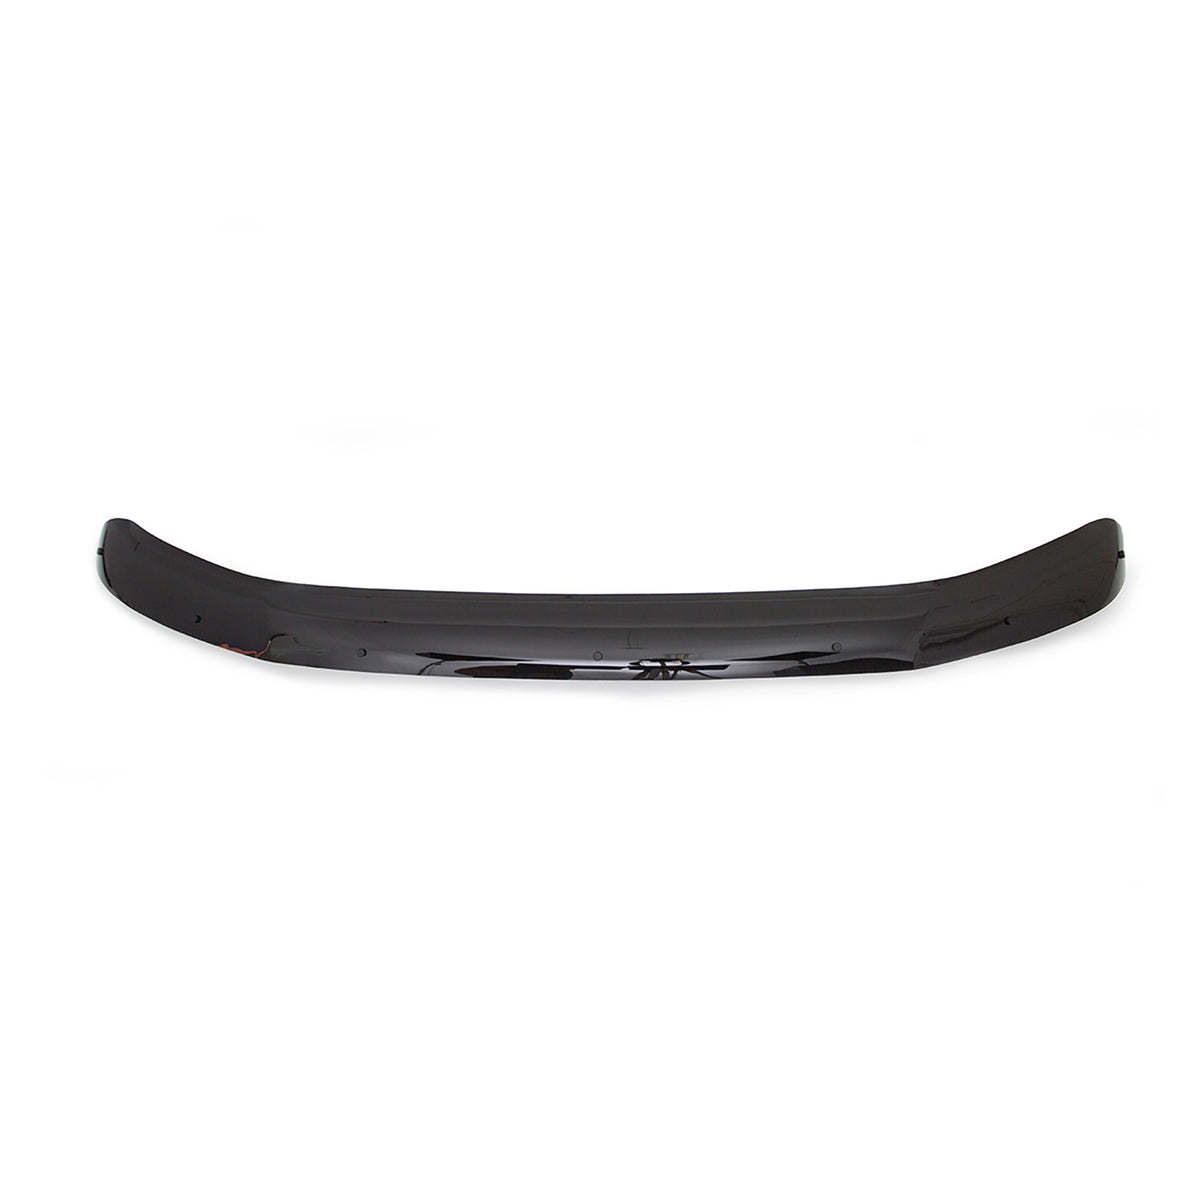 Bonnet deflector insect stone chip protection for VW T5 2010-2015 black